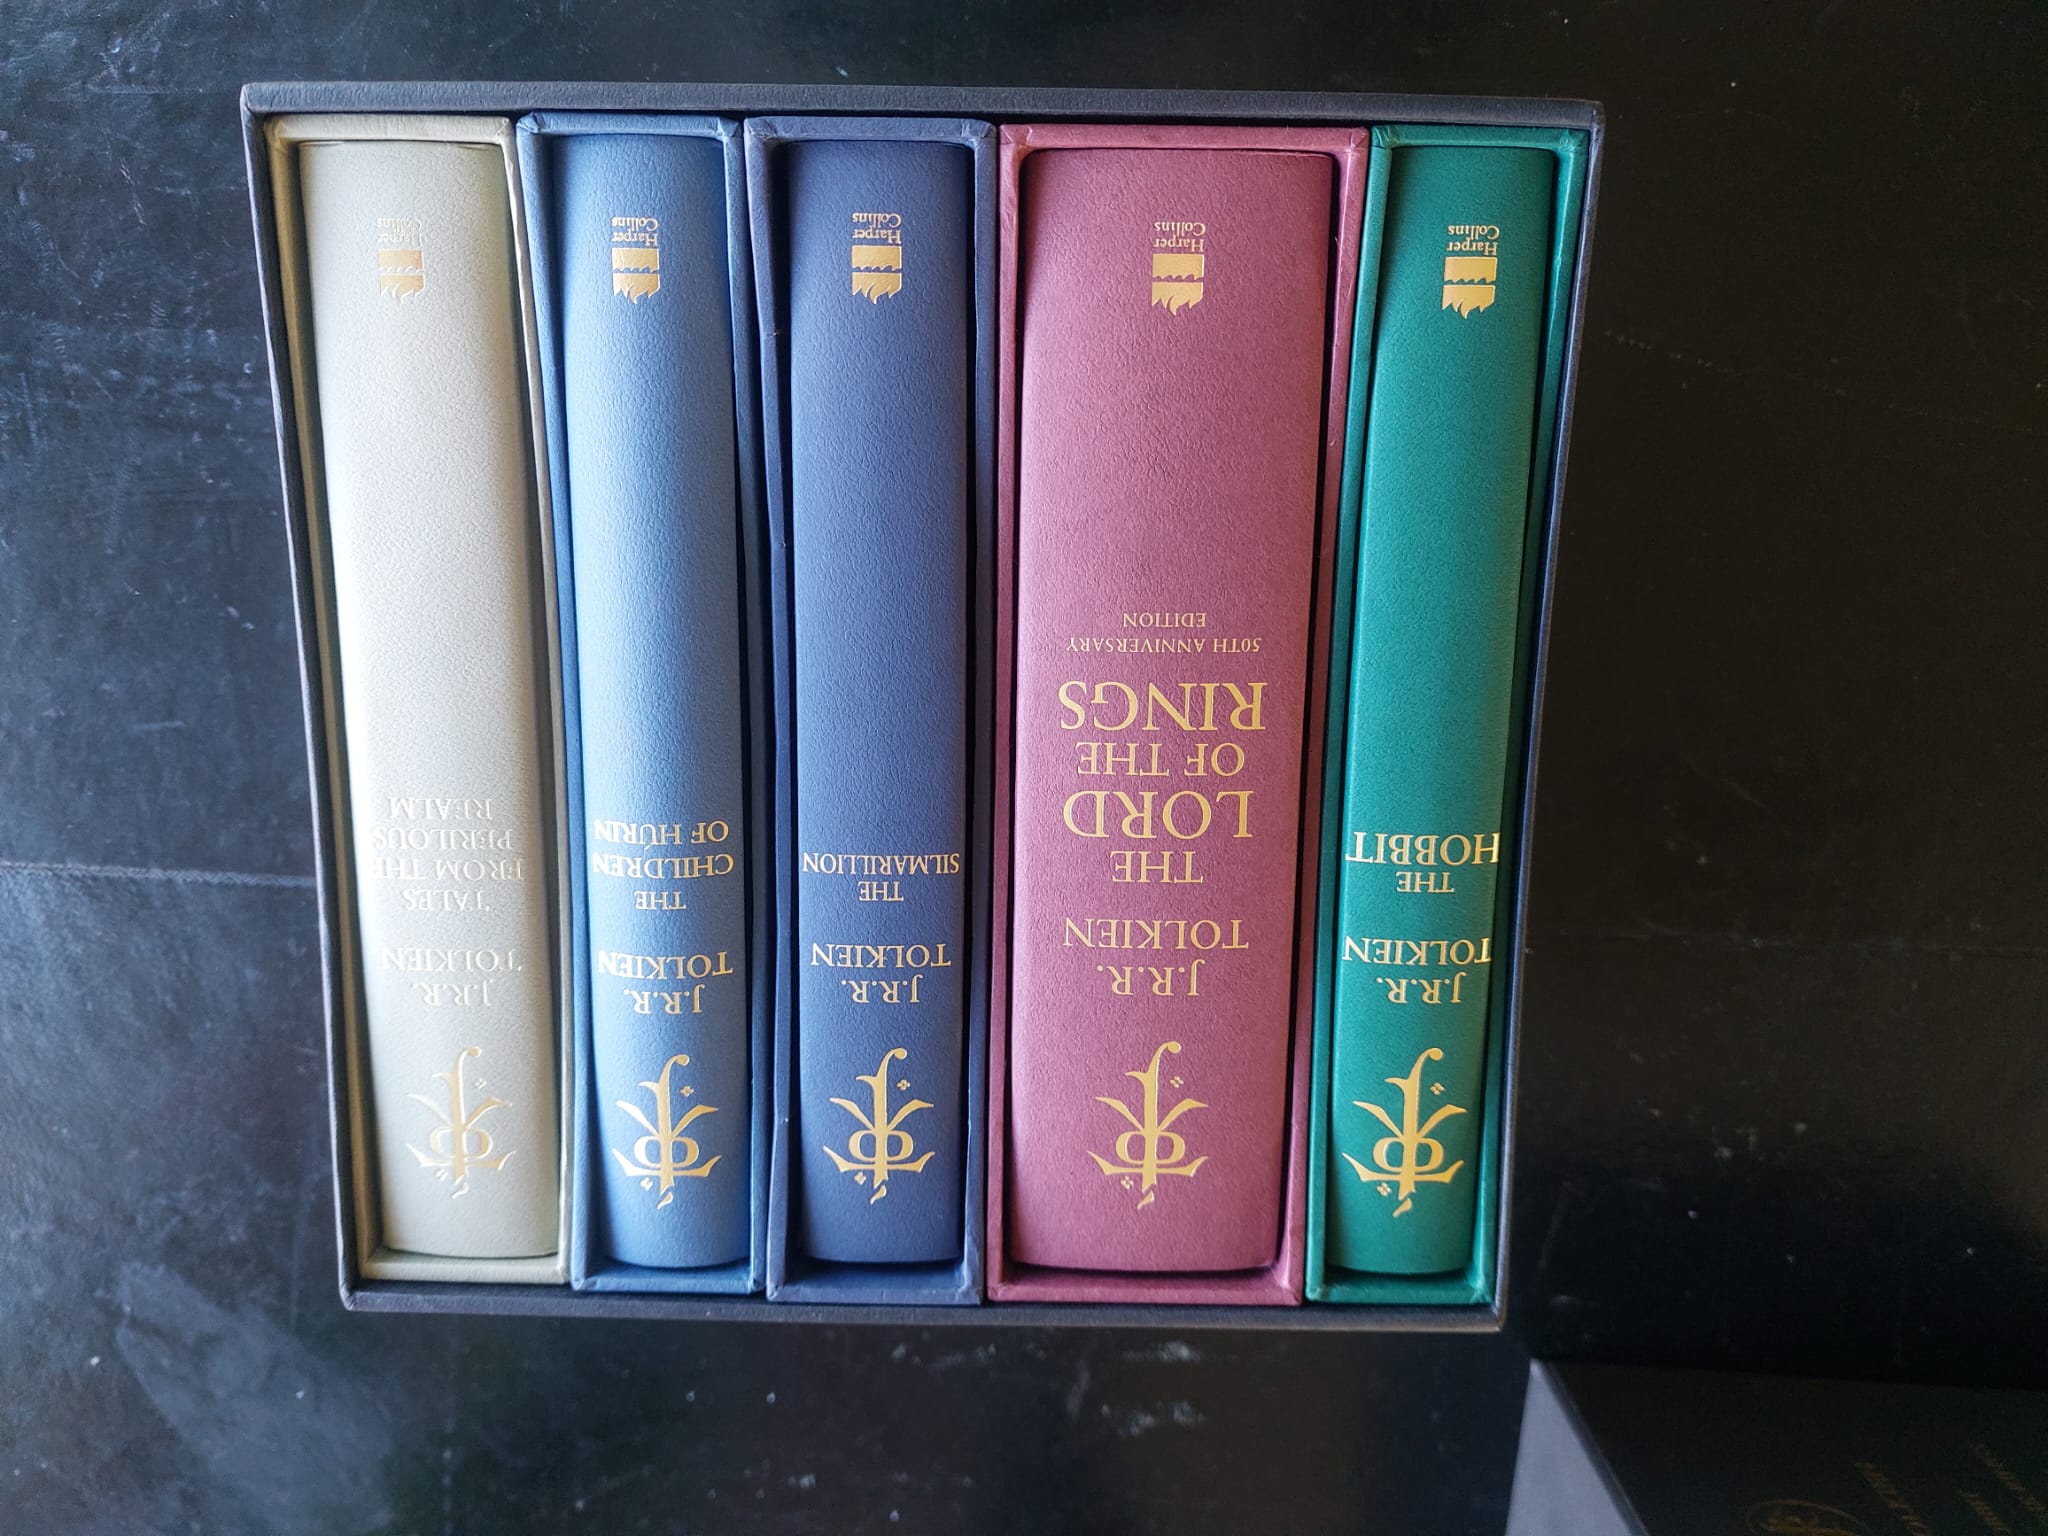 
The J.R.R. Tolkien 5-volume Deluxe Collection in publishers slipcase 1